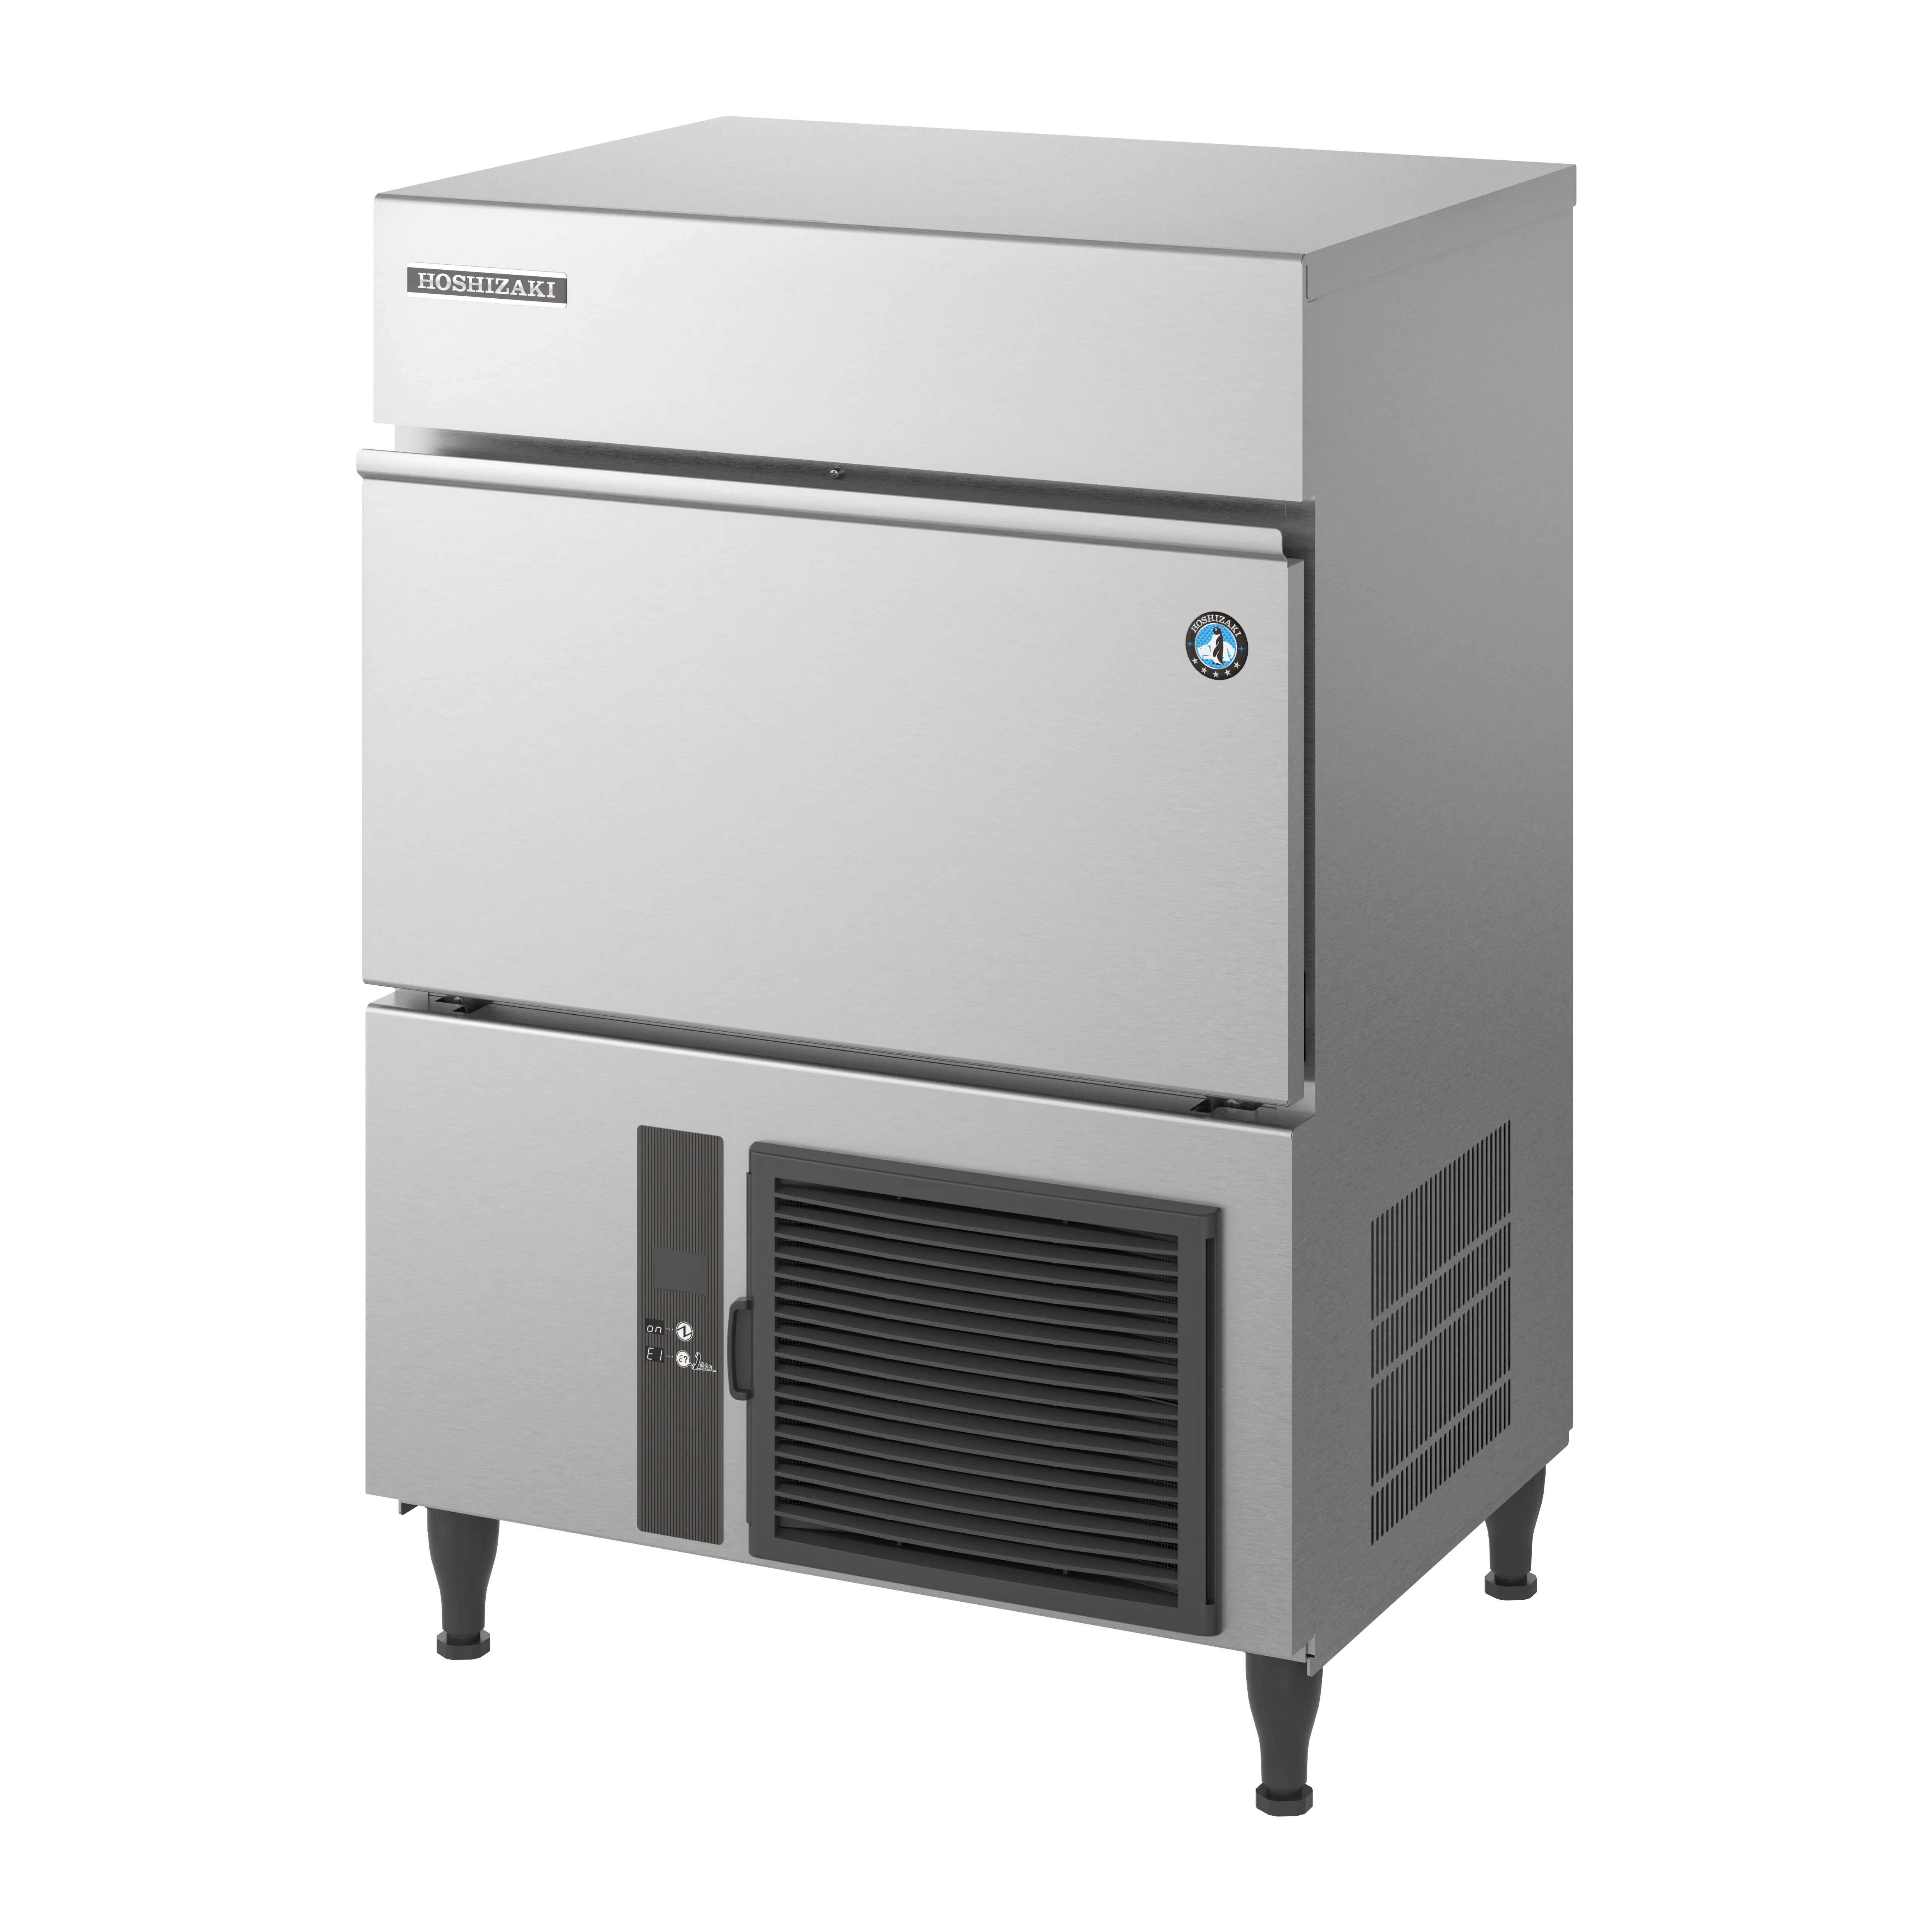 Hoshizaki IM-65WNE-25 Self Contained Cube Ice Maker, 66kg/24hrs